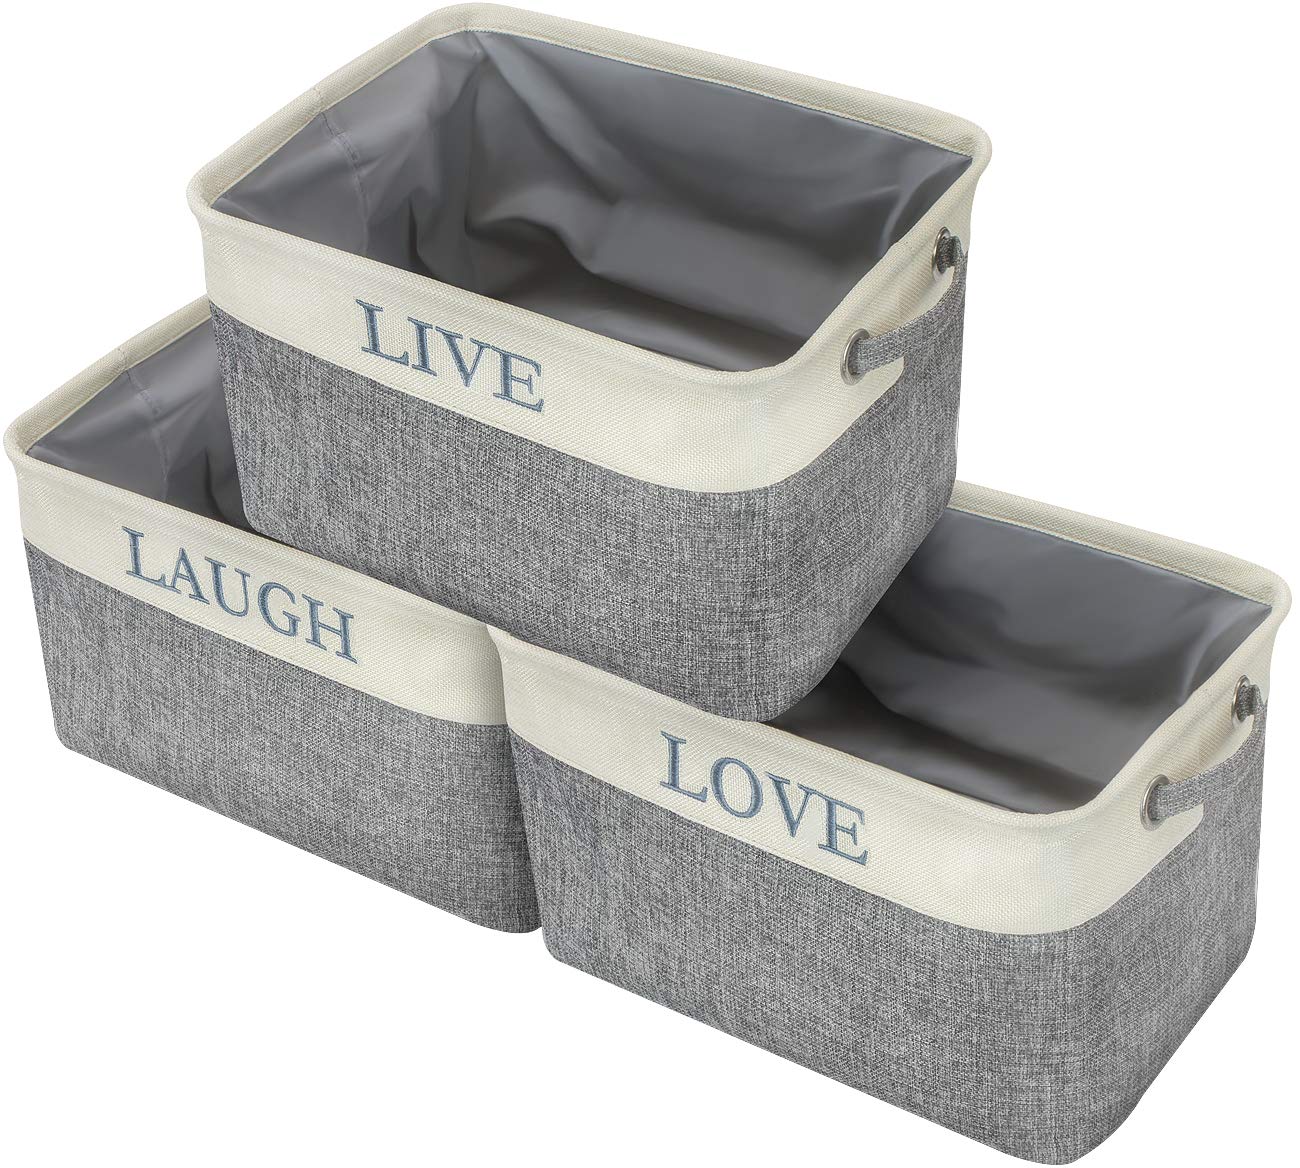 Sorbus Fabric Storage Cubes 15 Inch - Big Sturdy Collapsible Storage Bins with Dual Handles - Foldable Baskets for Organizing -Decorative Storage Baskets for Shelves | Home & Office Use -3 Pack| Grey